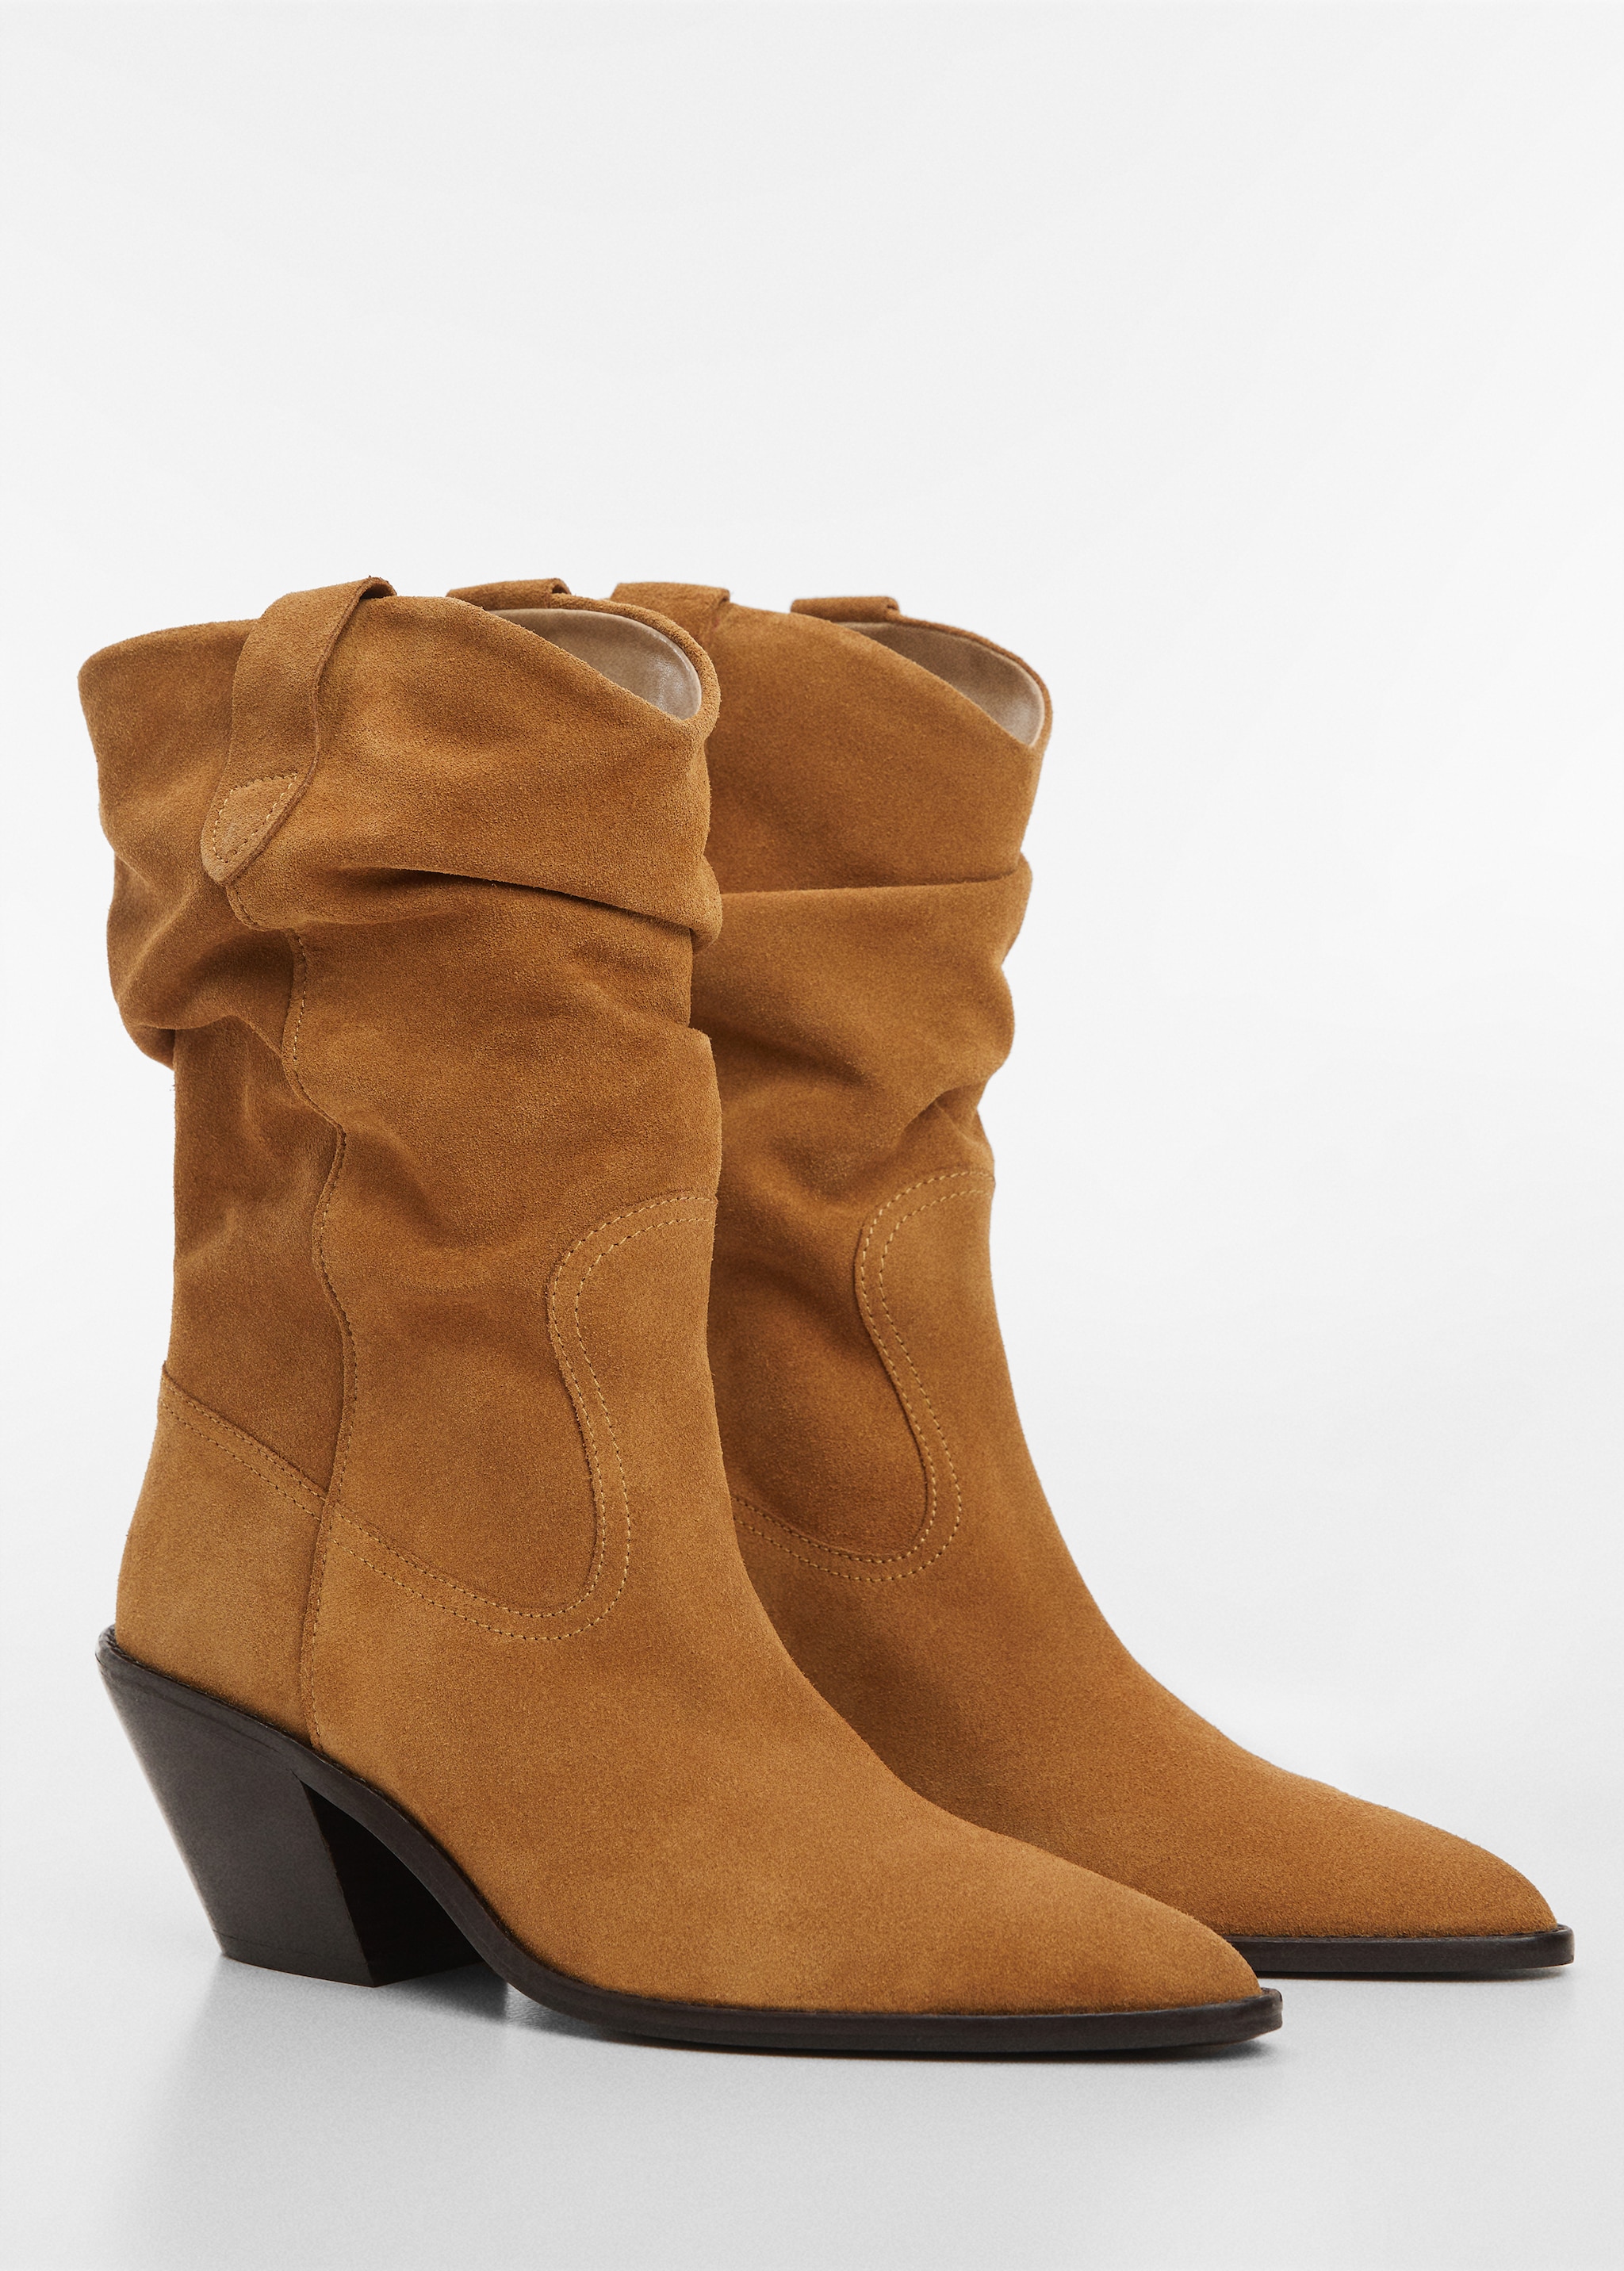 Suede leather ankle boots - Medium plane